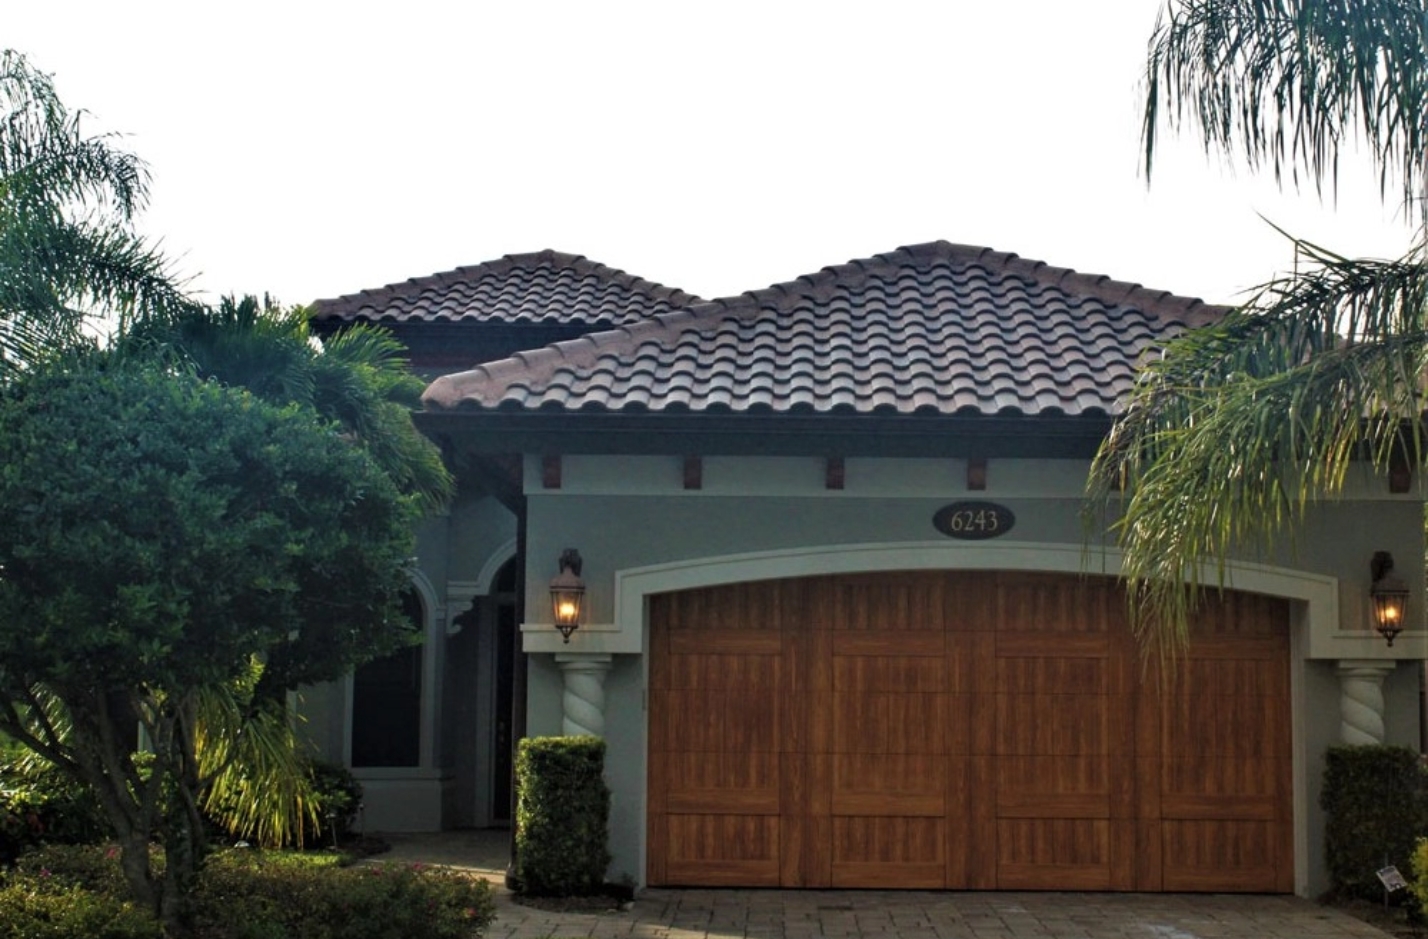 Home and Garage with tile roof in Tampa Bay Florida